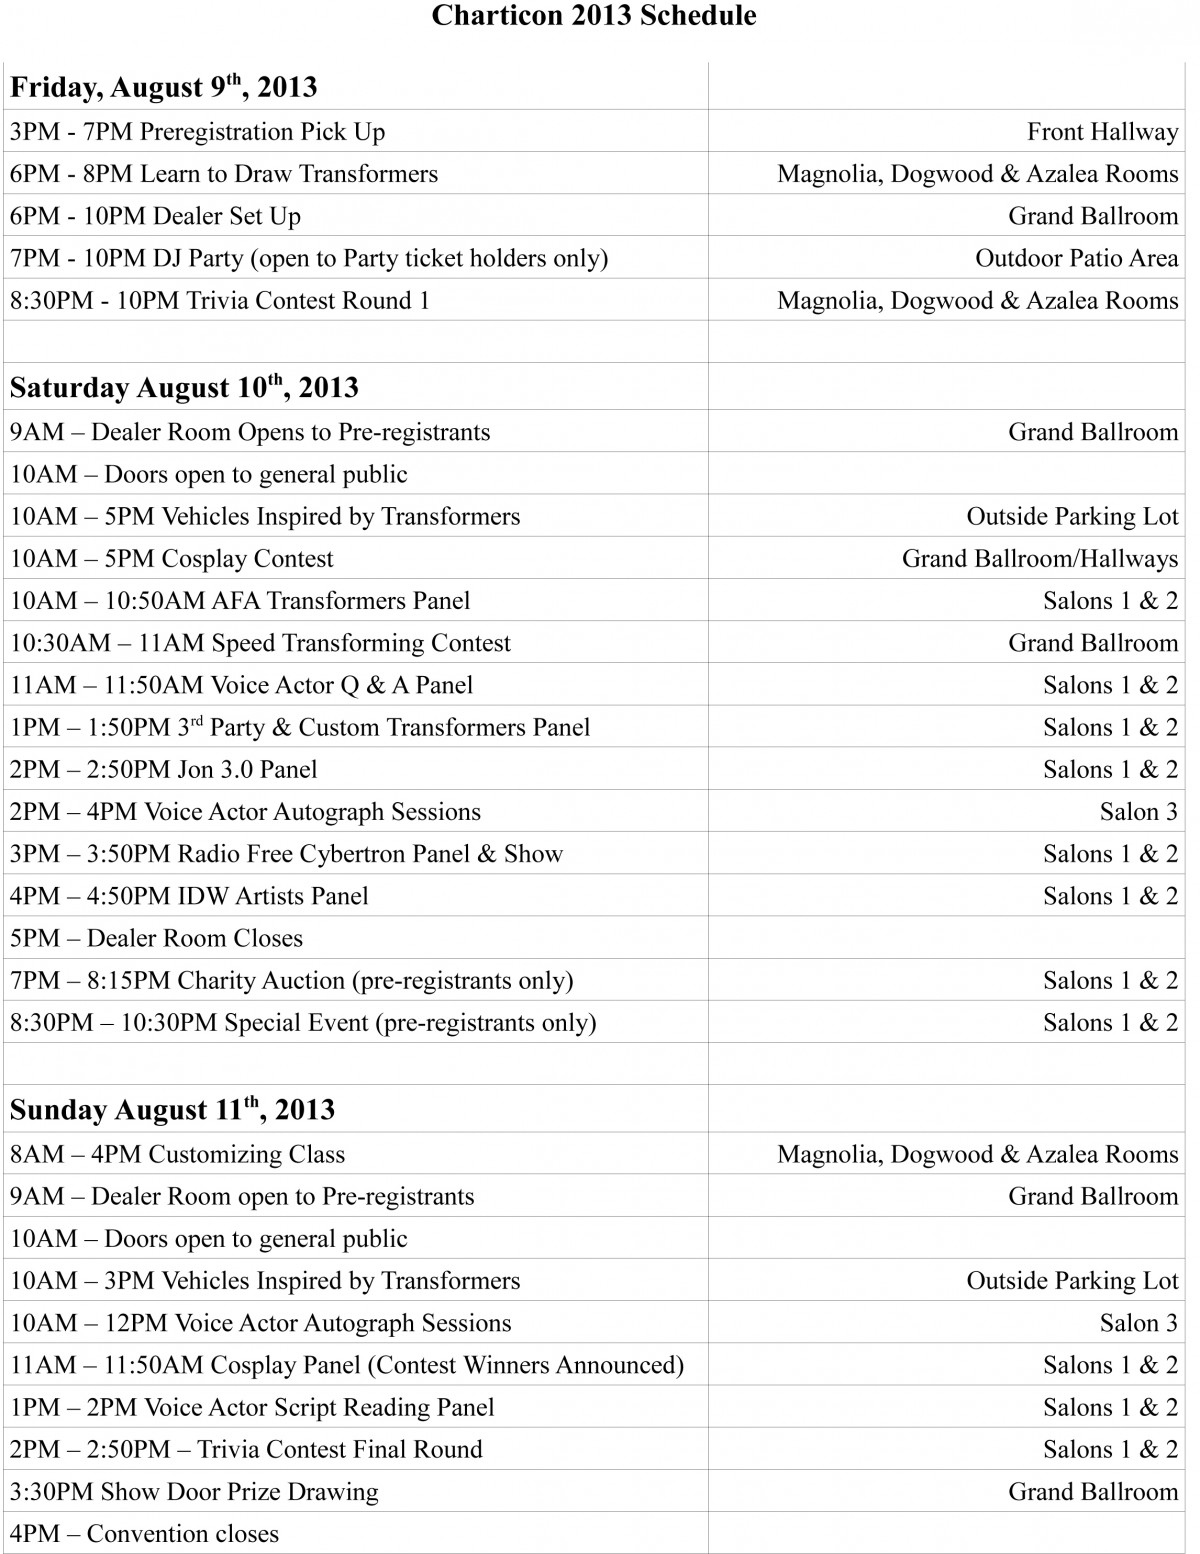 Charticon 2013 Schedule released!